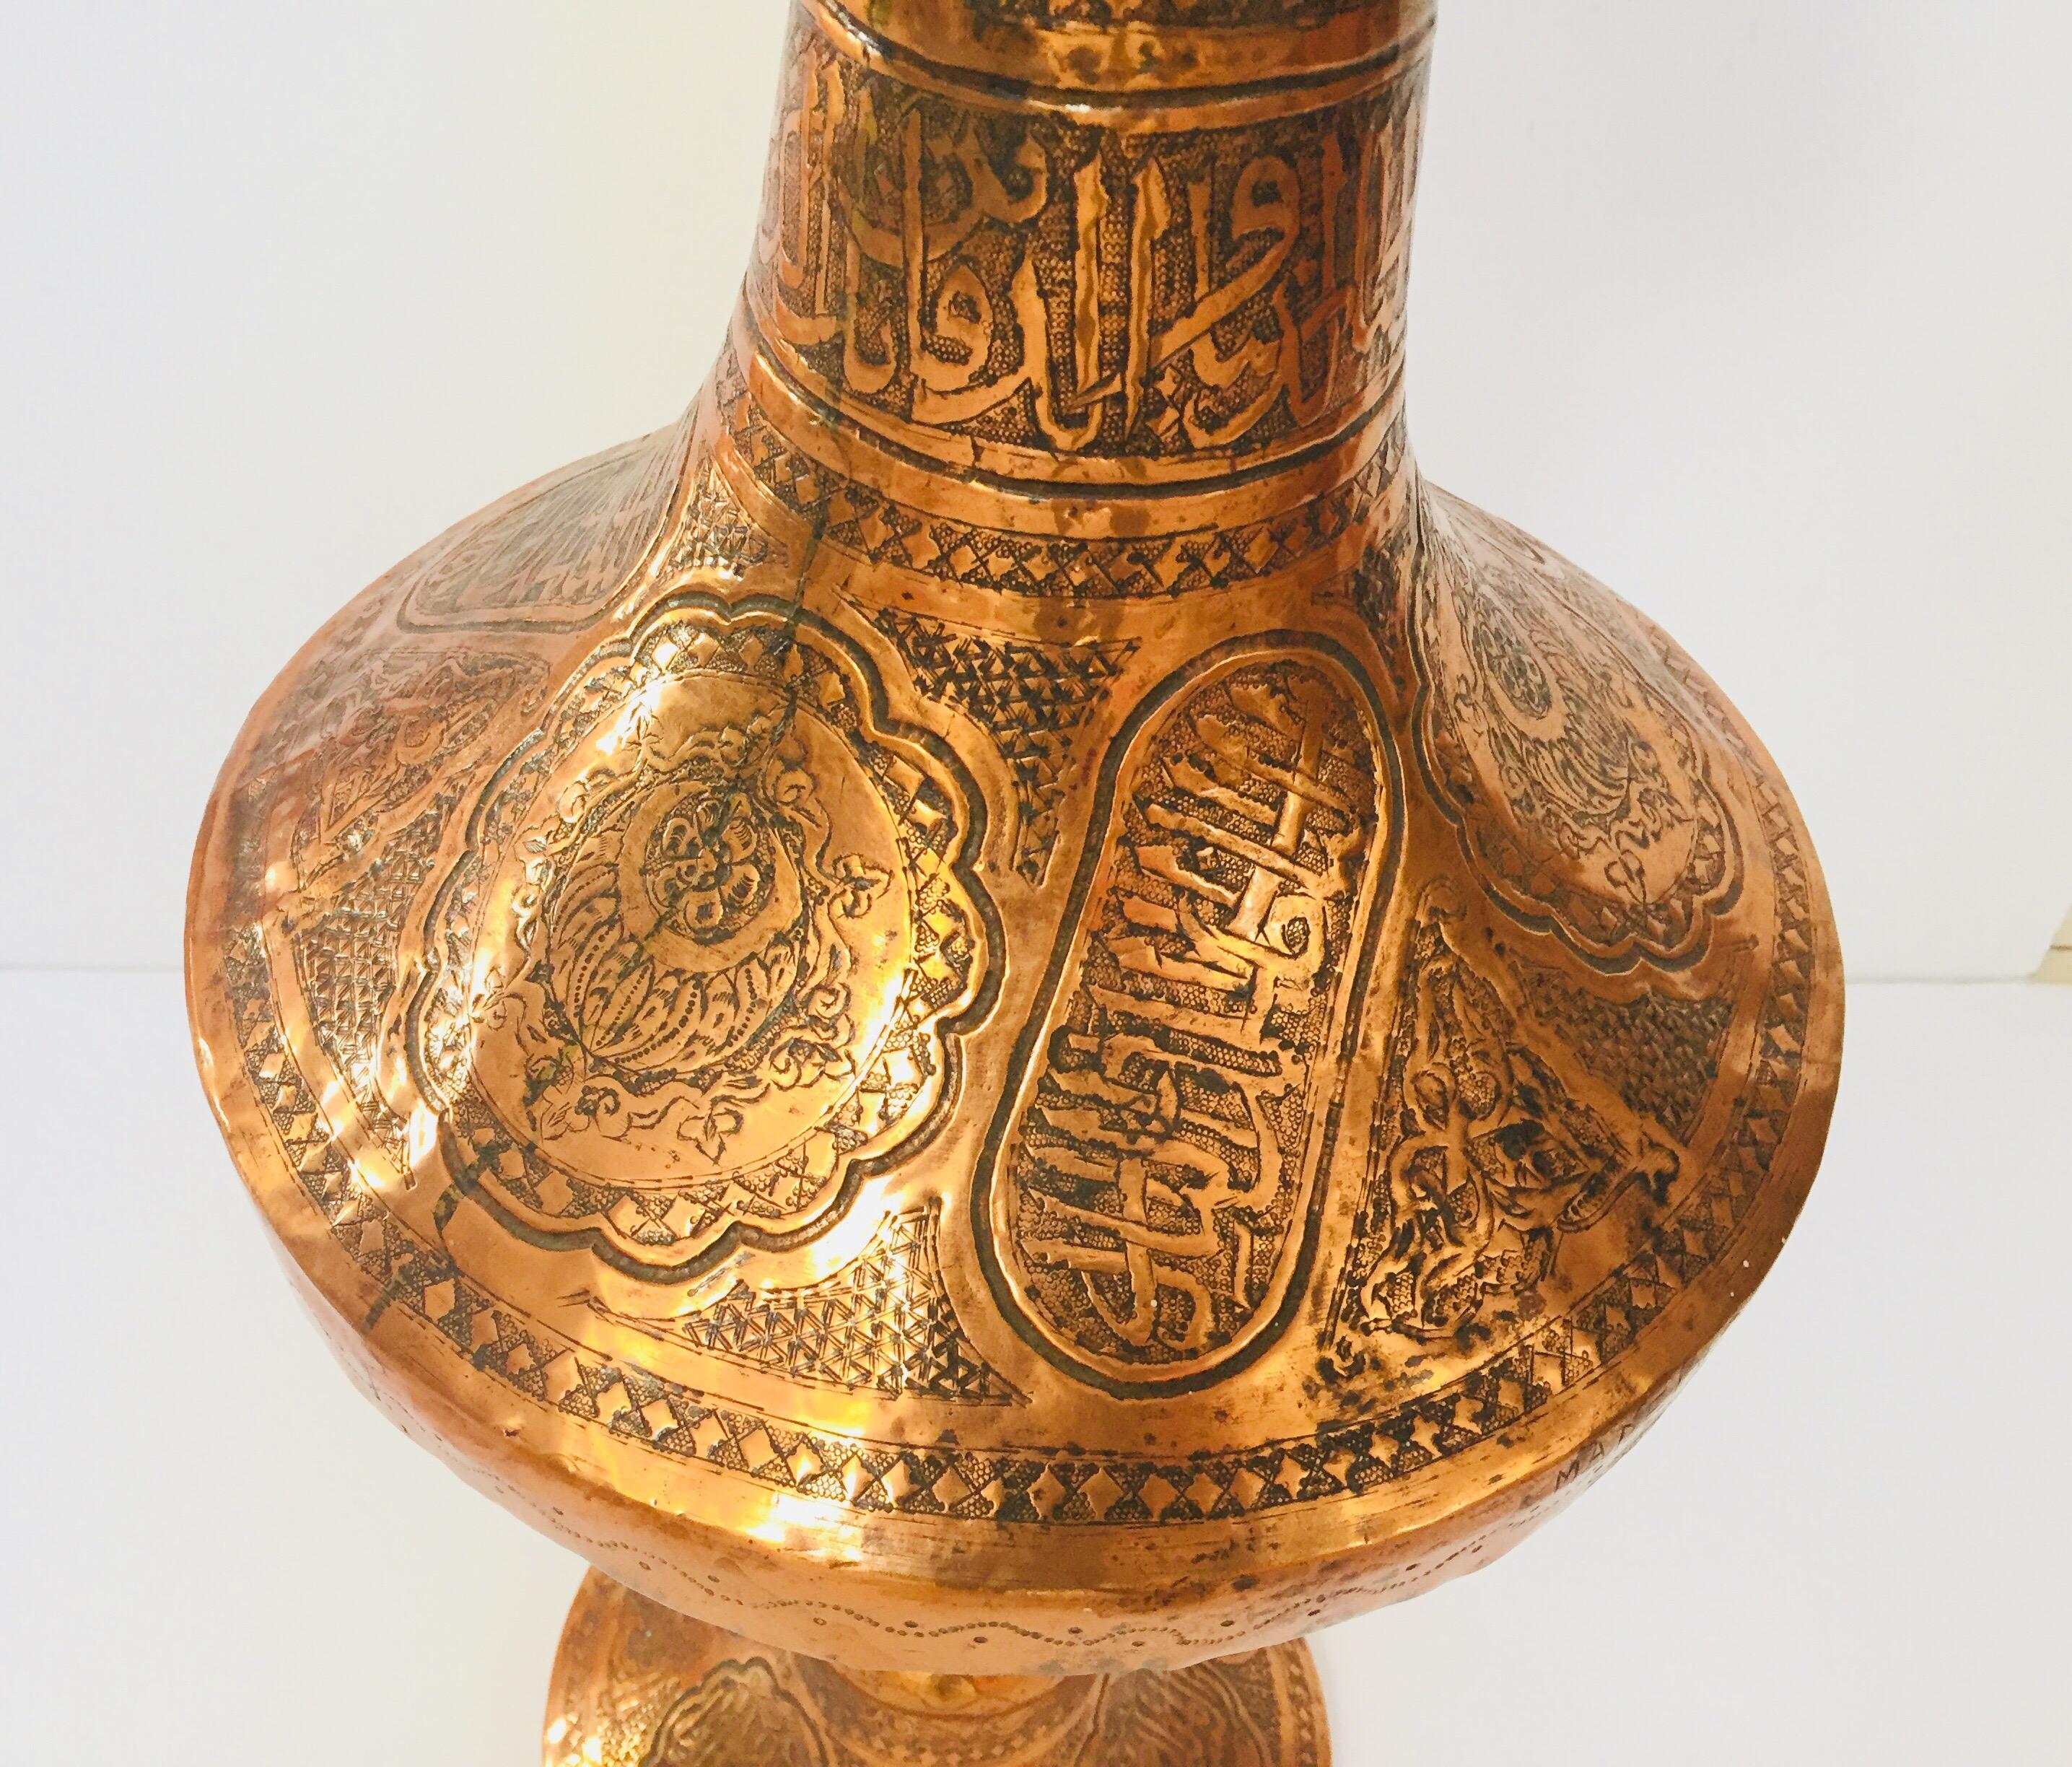 20th Century Middle Eastern Syrian Copper Islamic Art Vase Engraved with Arabic Calligraphy